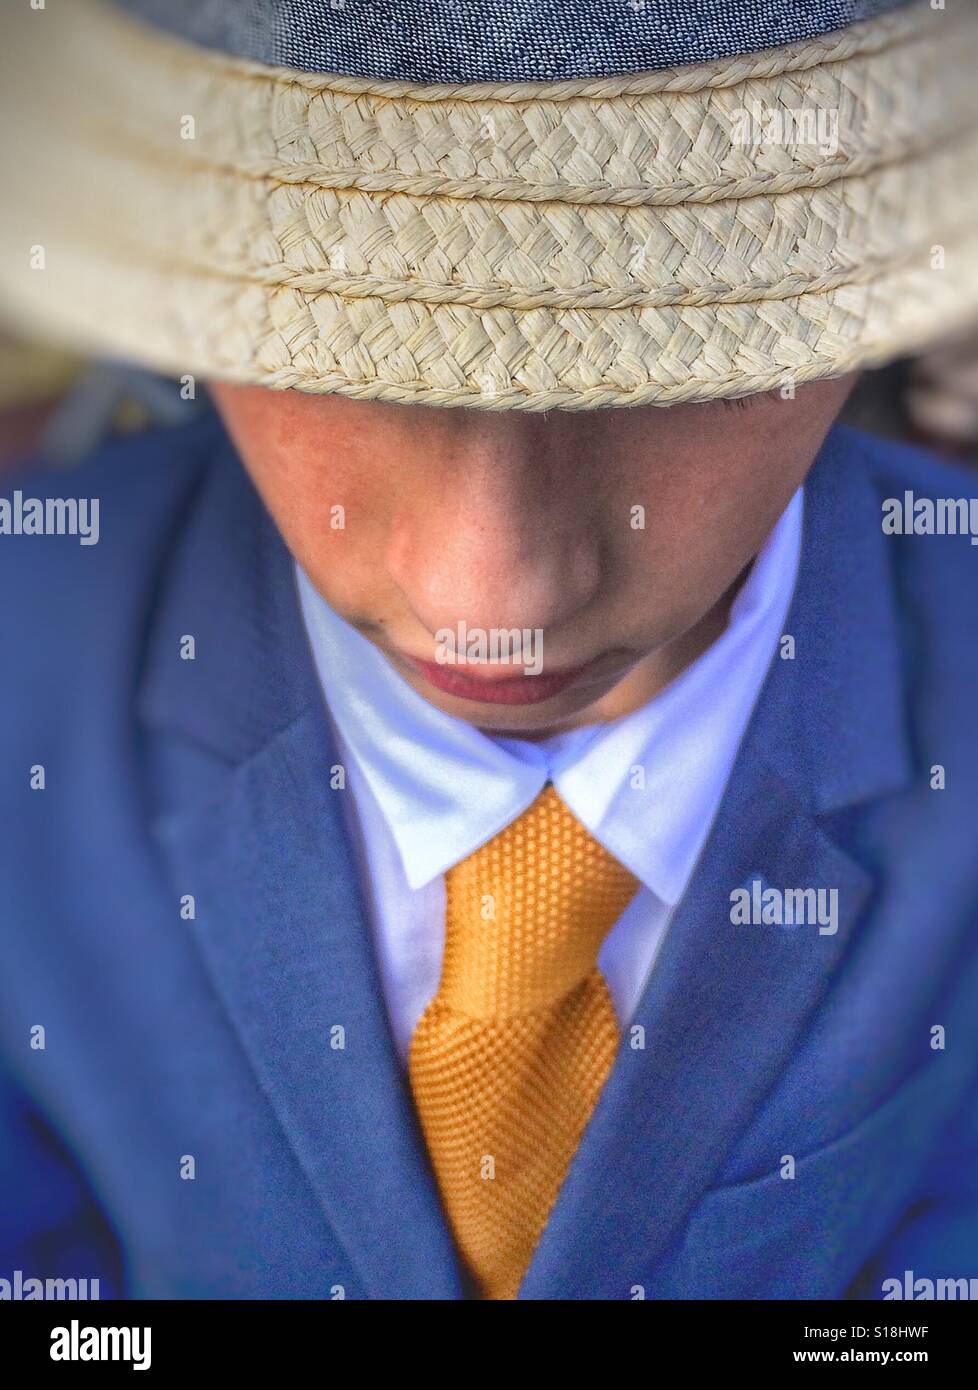 A young boy wearing a hat, suit & tie Stock Photo